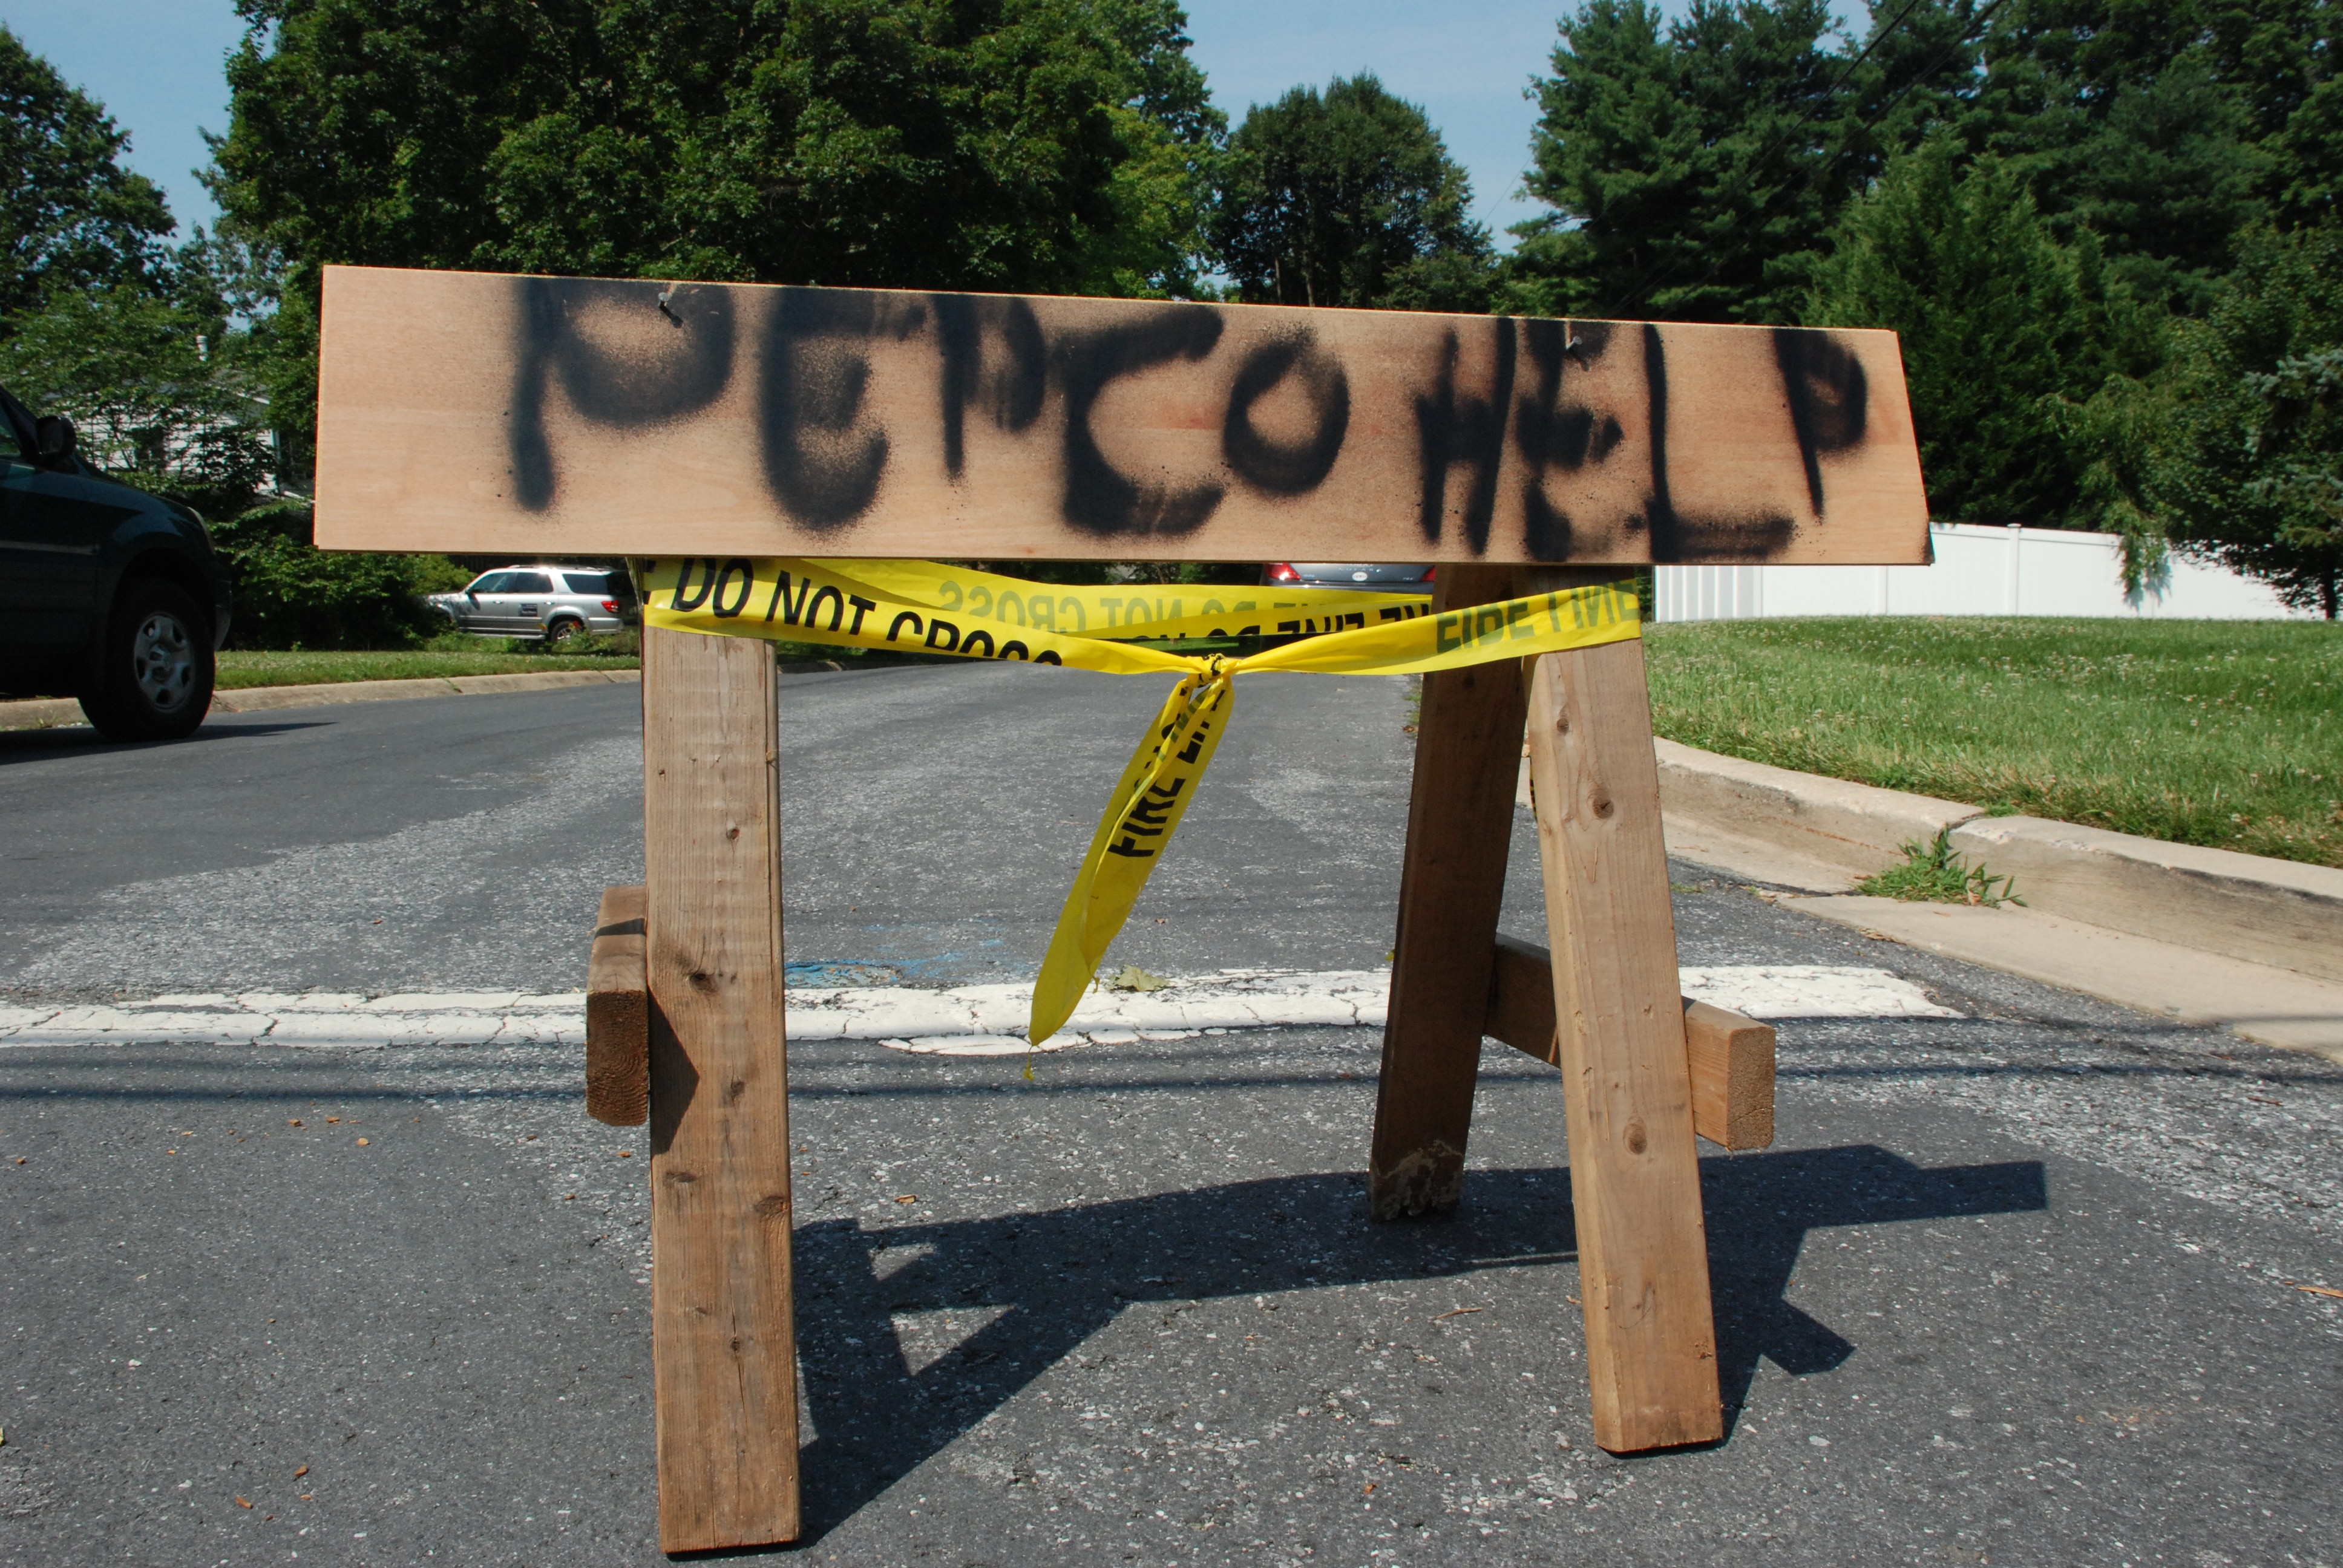 Image of a wooden horse with the words "Pepco help" sprayed painted in it at ebd of street in Aspen Hill, MD